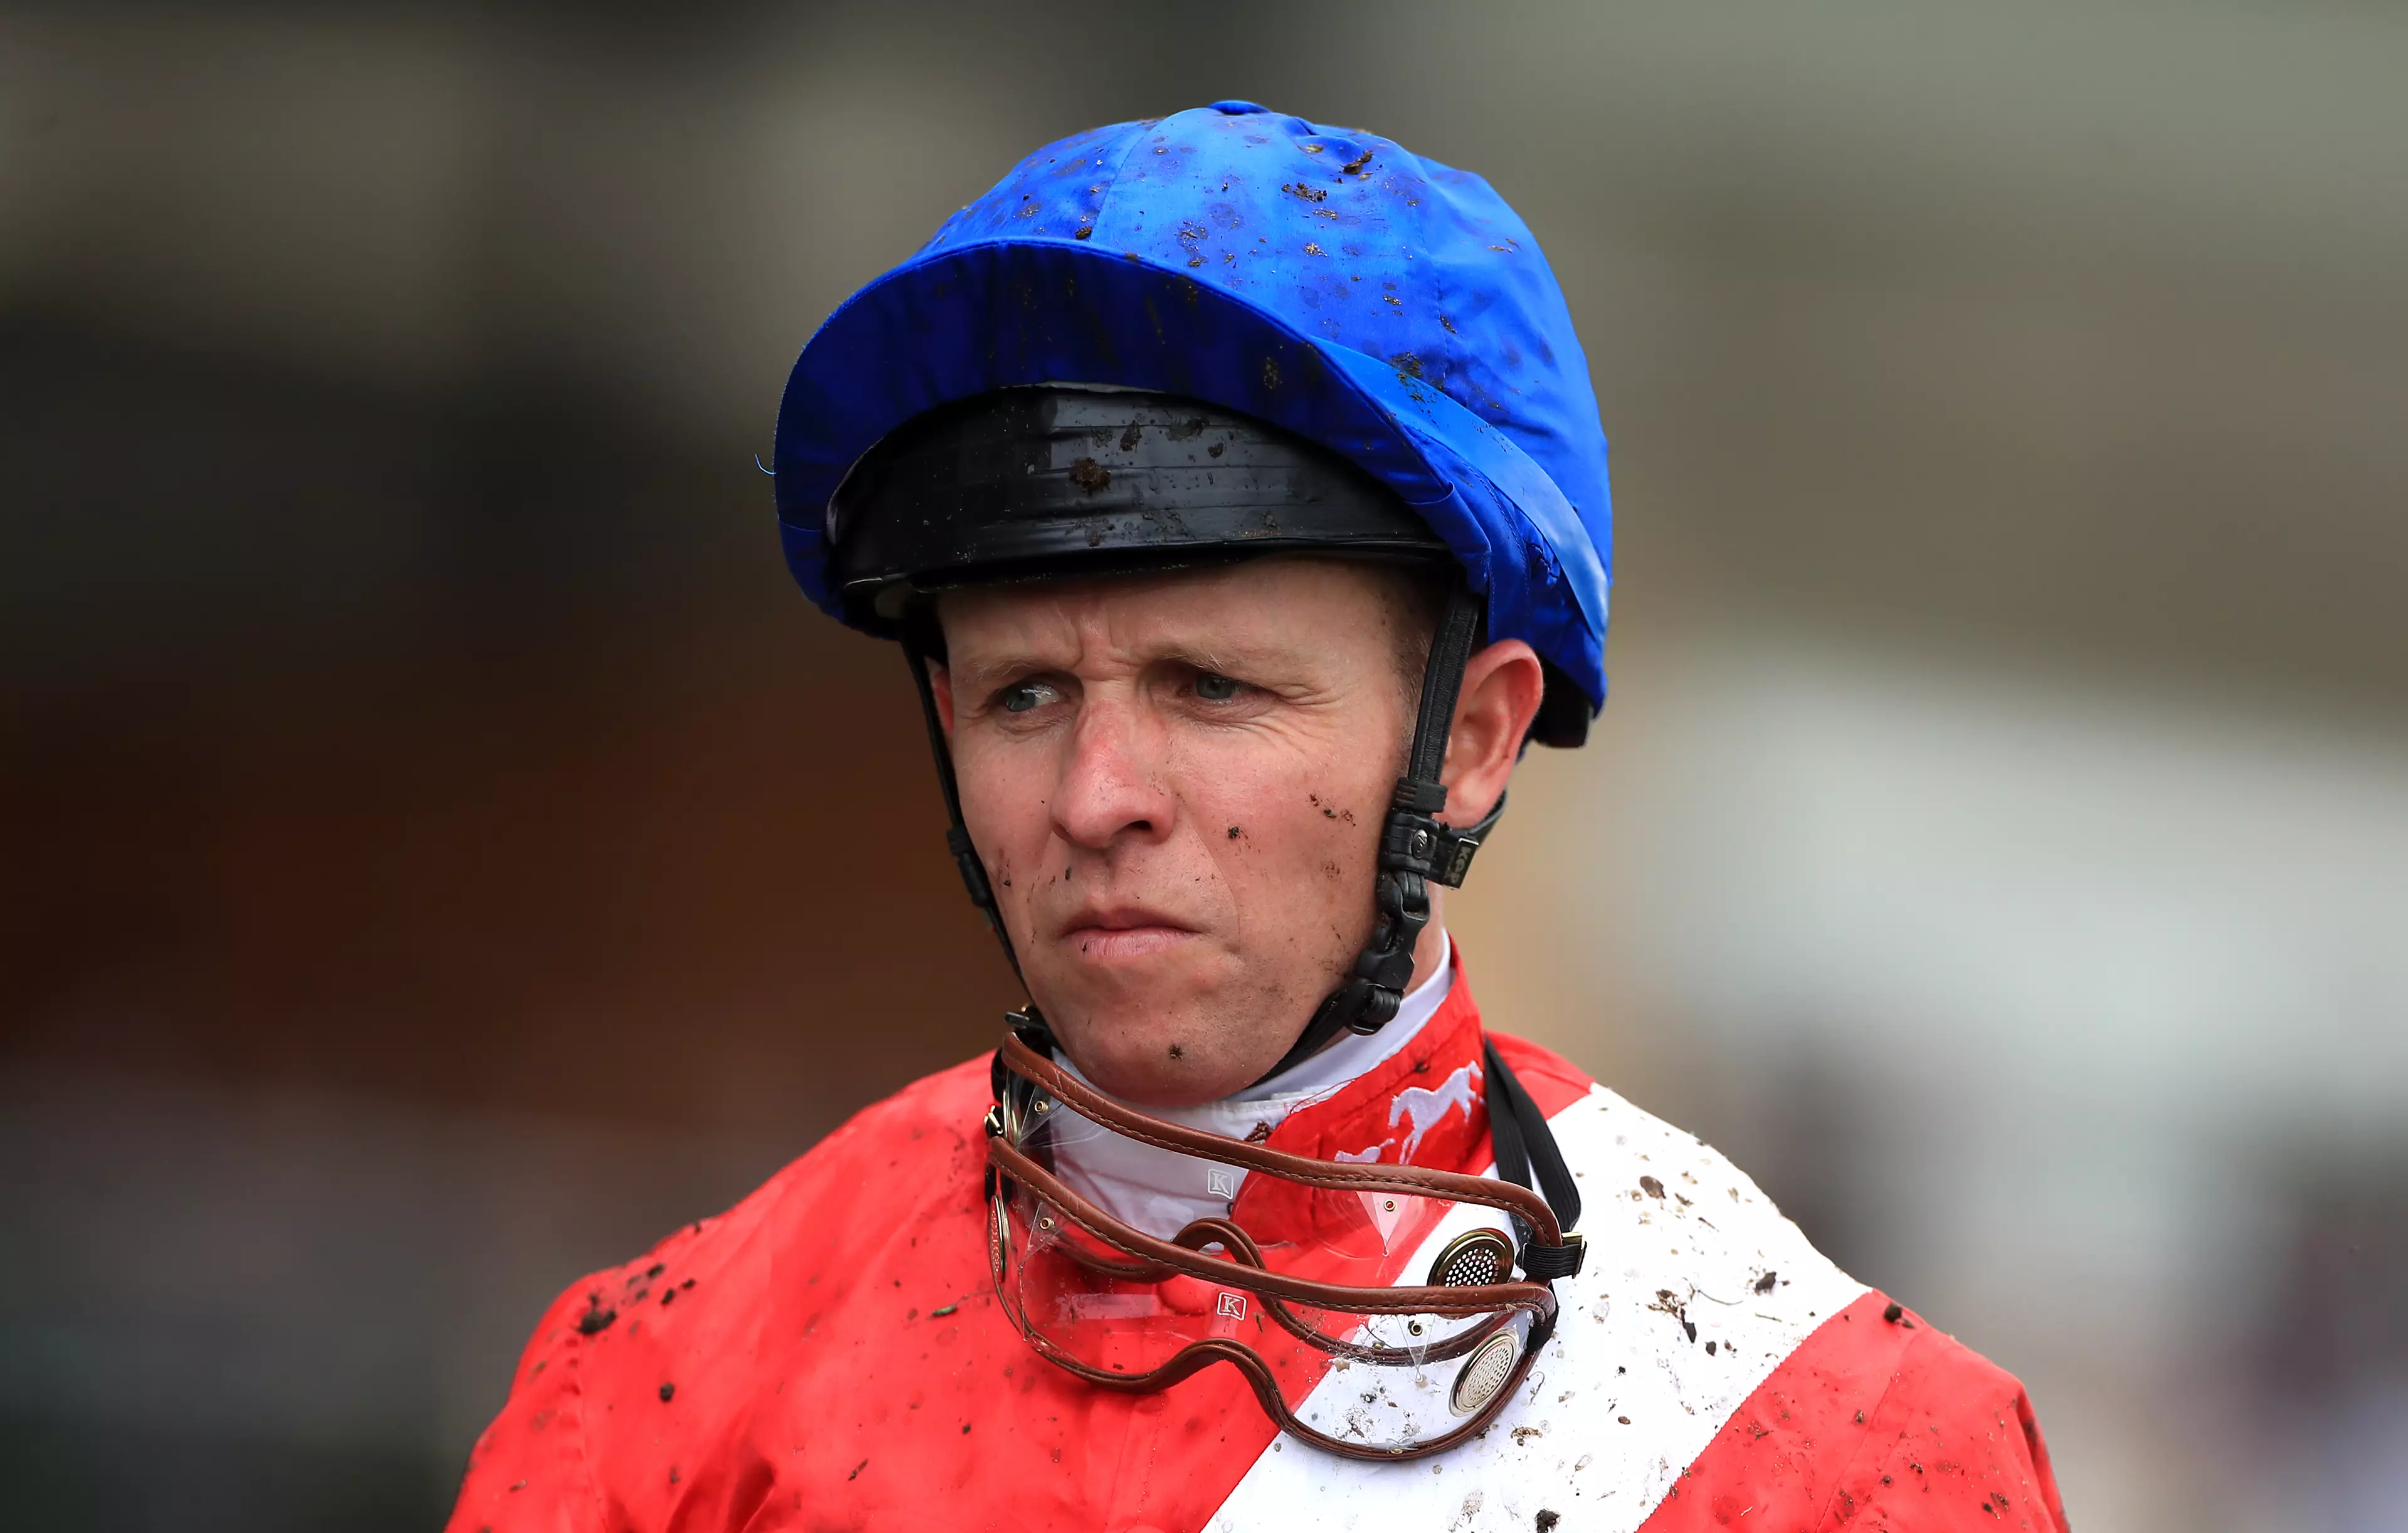 Jockey Kerrin McEvoy was fined $50,000 for whipping his horse too many times.